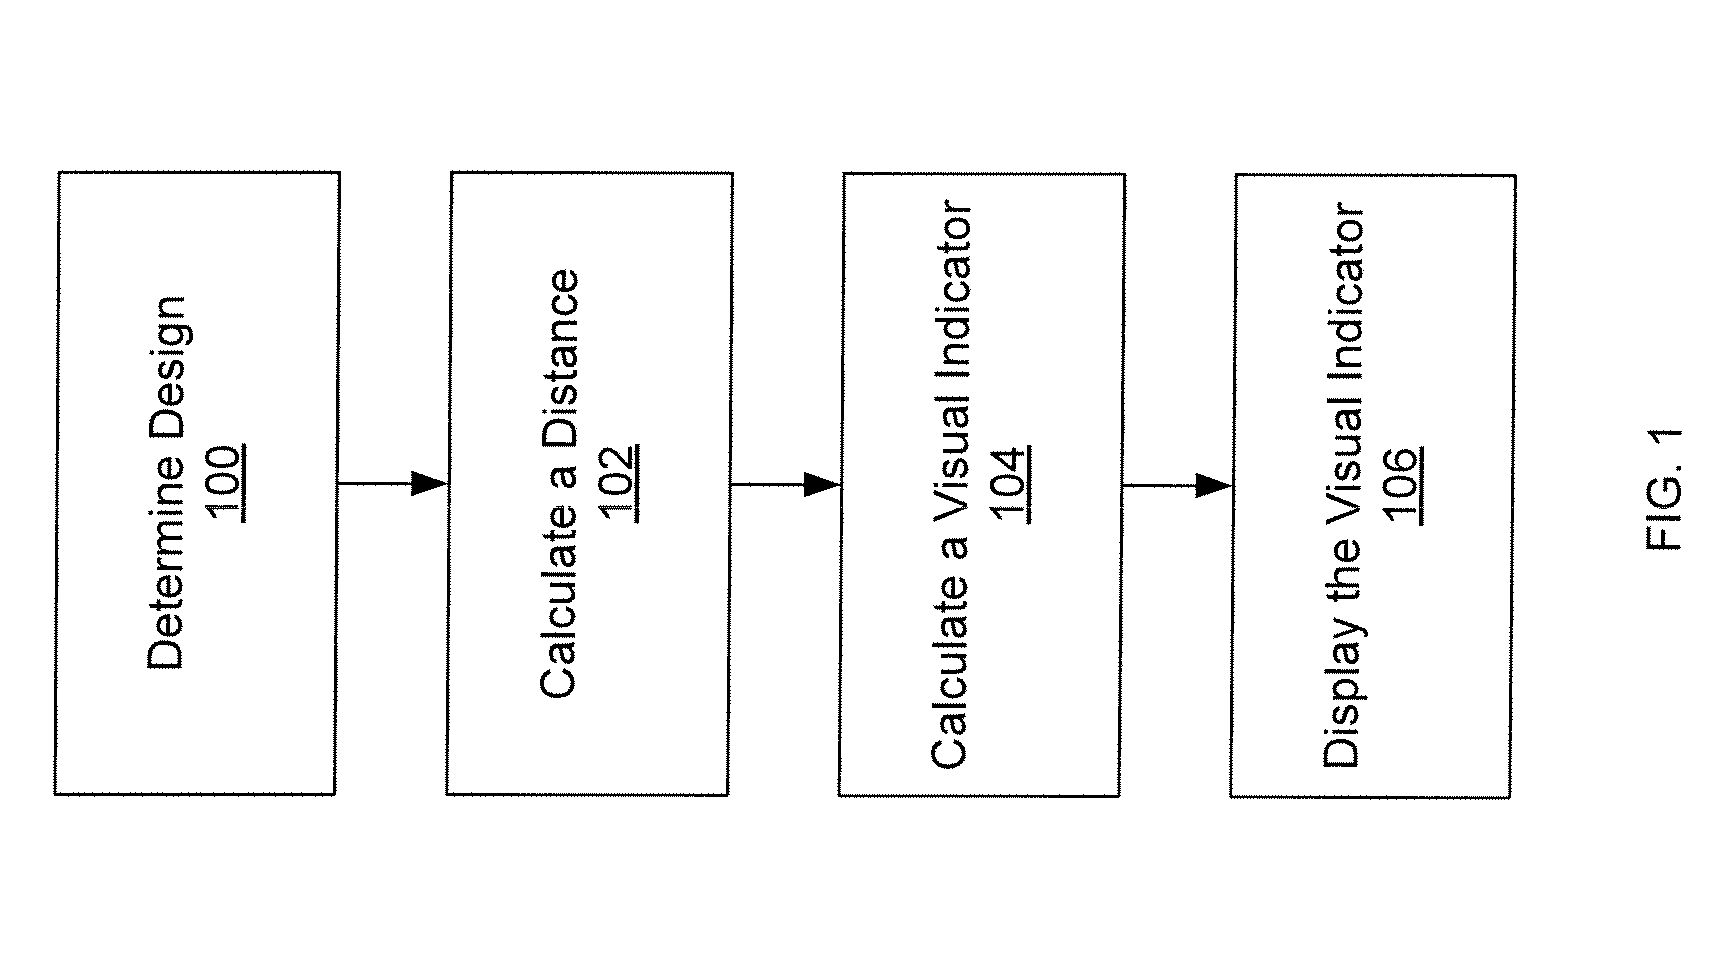 Graphical user interface for prototyping early instance density